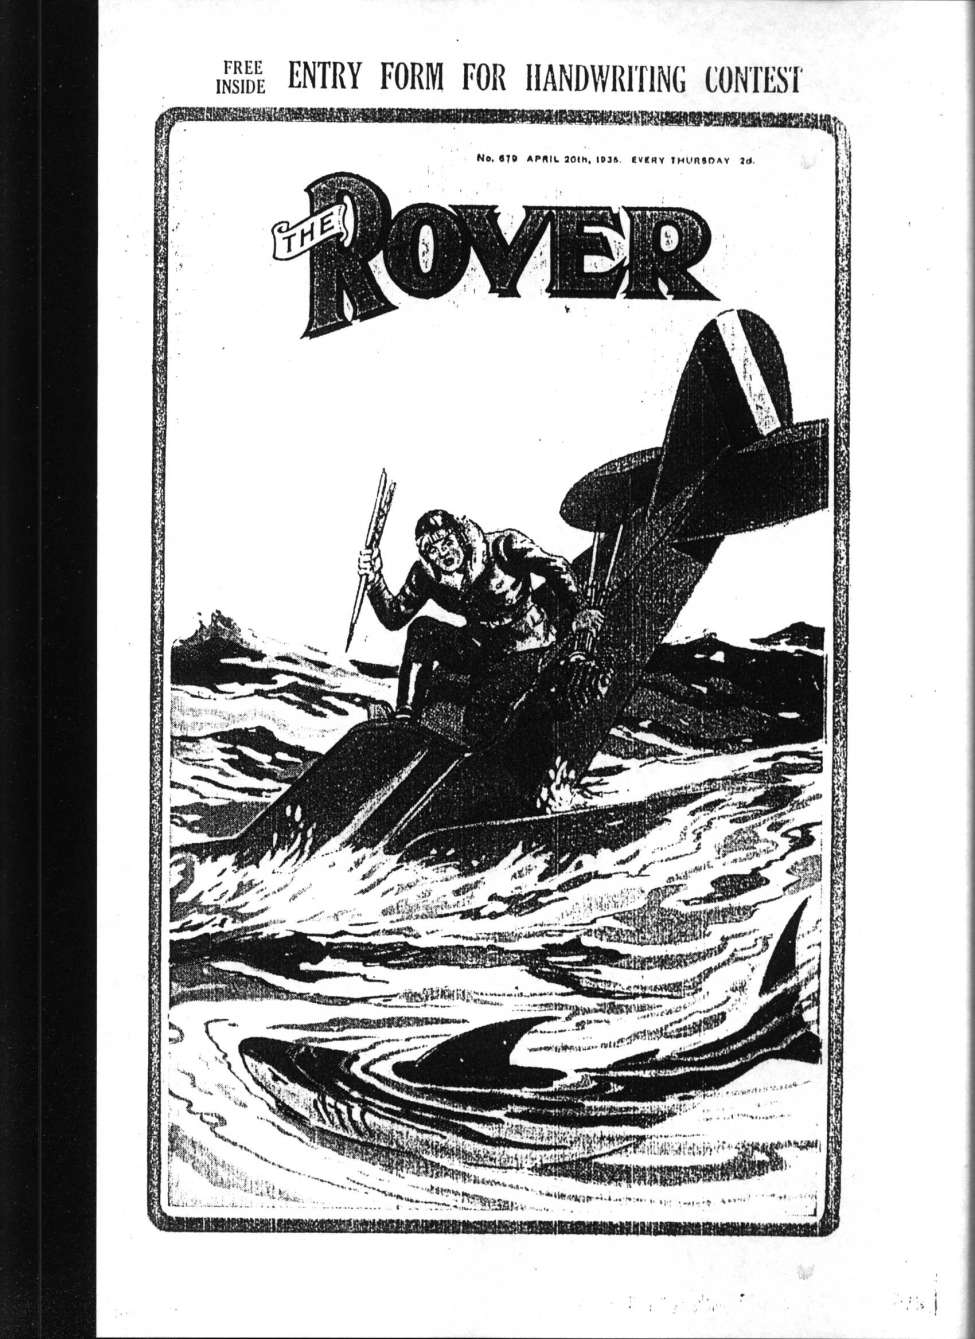 Book Cover For The Rover 679